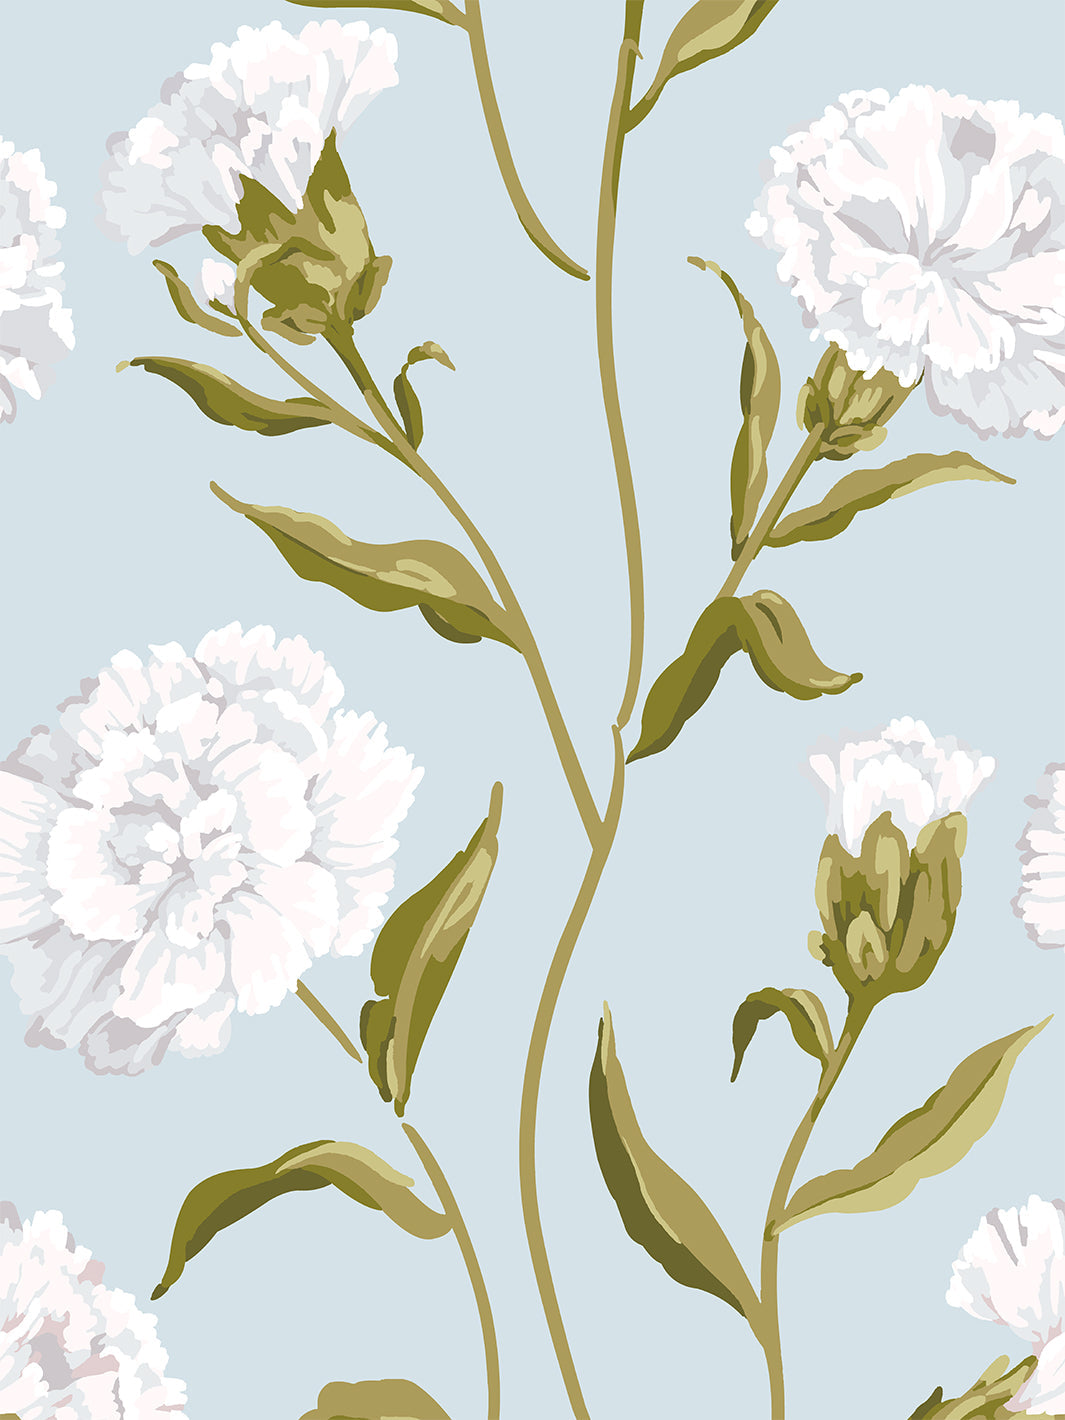 'Townhouse' Wallpaper by Sarah Jessica Parker - Morning Dew on Misty Blue